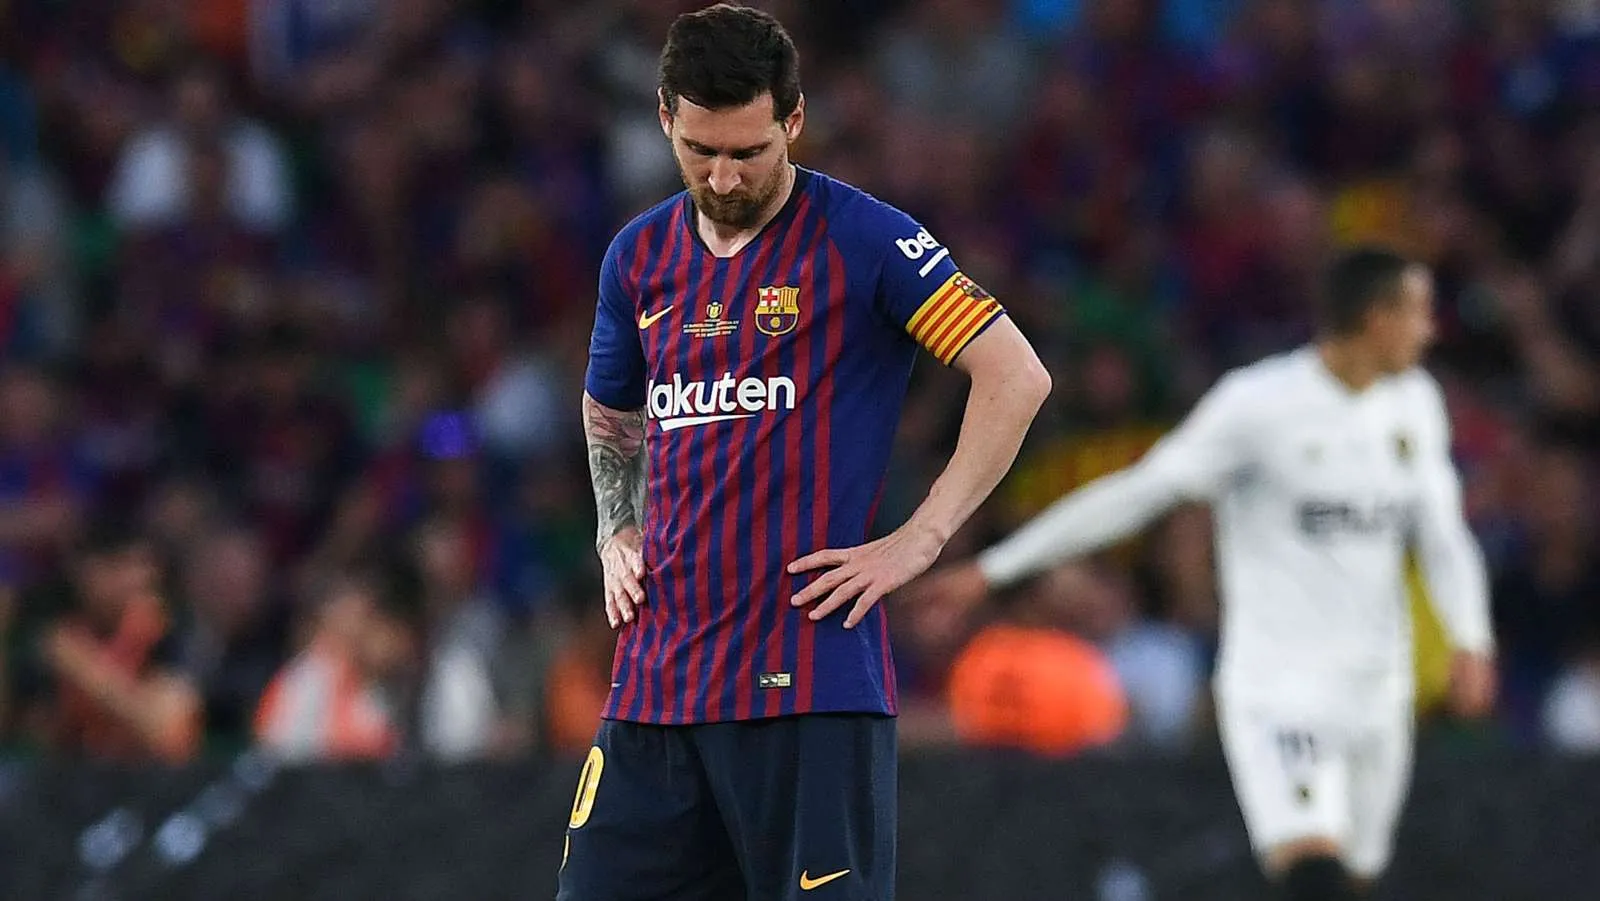 'Why doesn't he win in Europe?' - Van Gaal blames Messi for Barcelona's Champions League failures - Bóng Đá